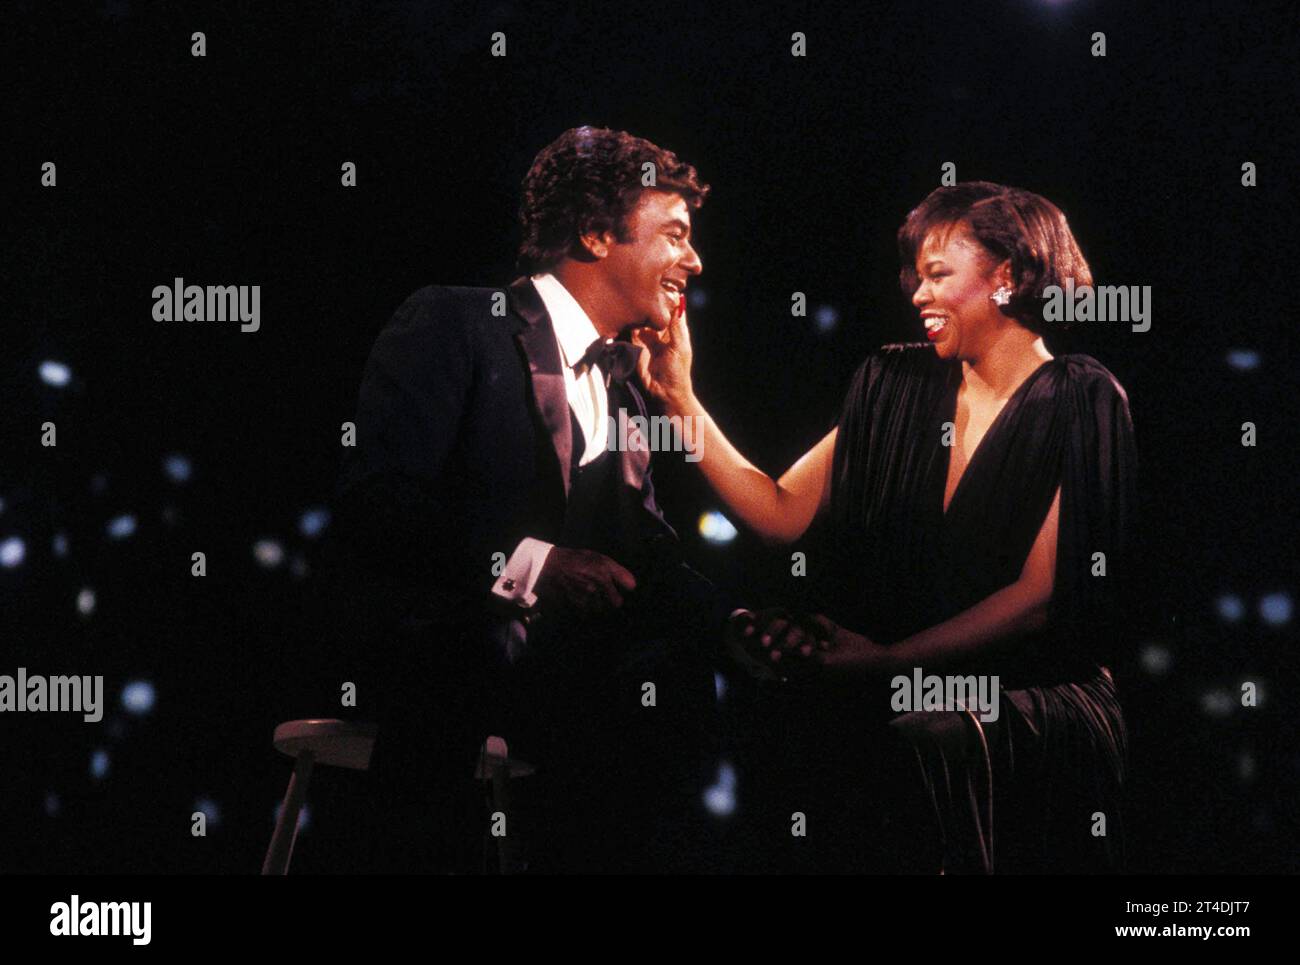 C0026 ;JOHNNY MATHIS AND DENIECE WILLIAMS ;   Credit: Lynn Mcafee / Performing Arts Images www.performingartsimages.com Stock Photo